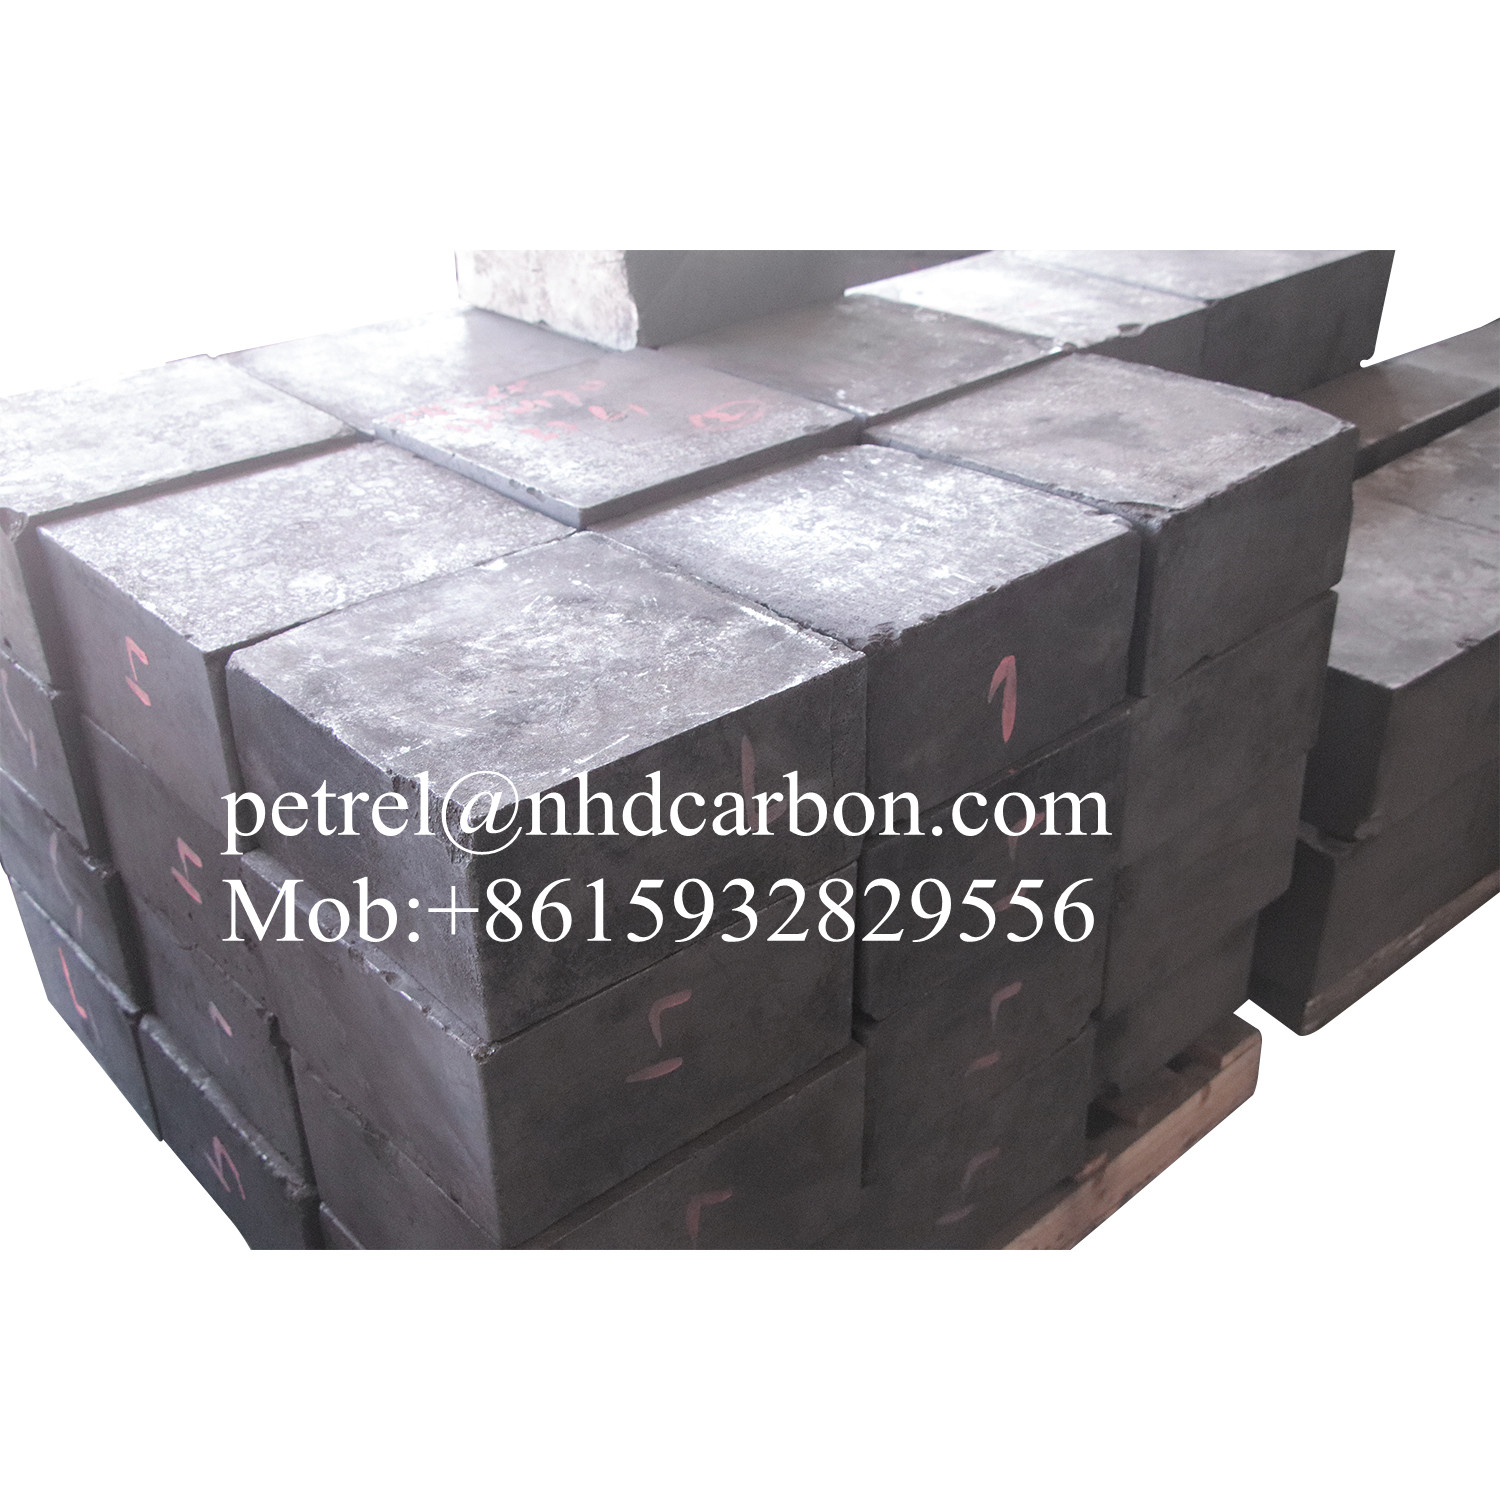 High purity molded Graphite block 